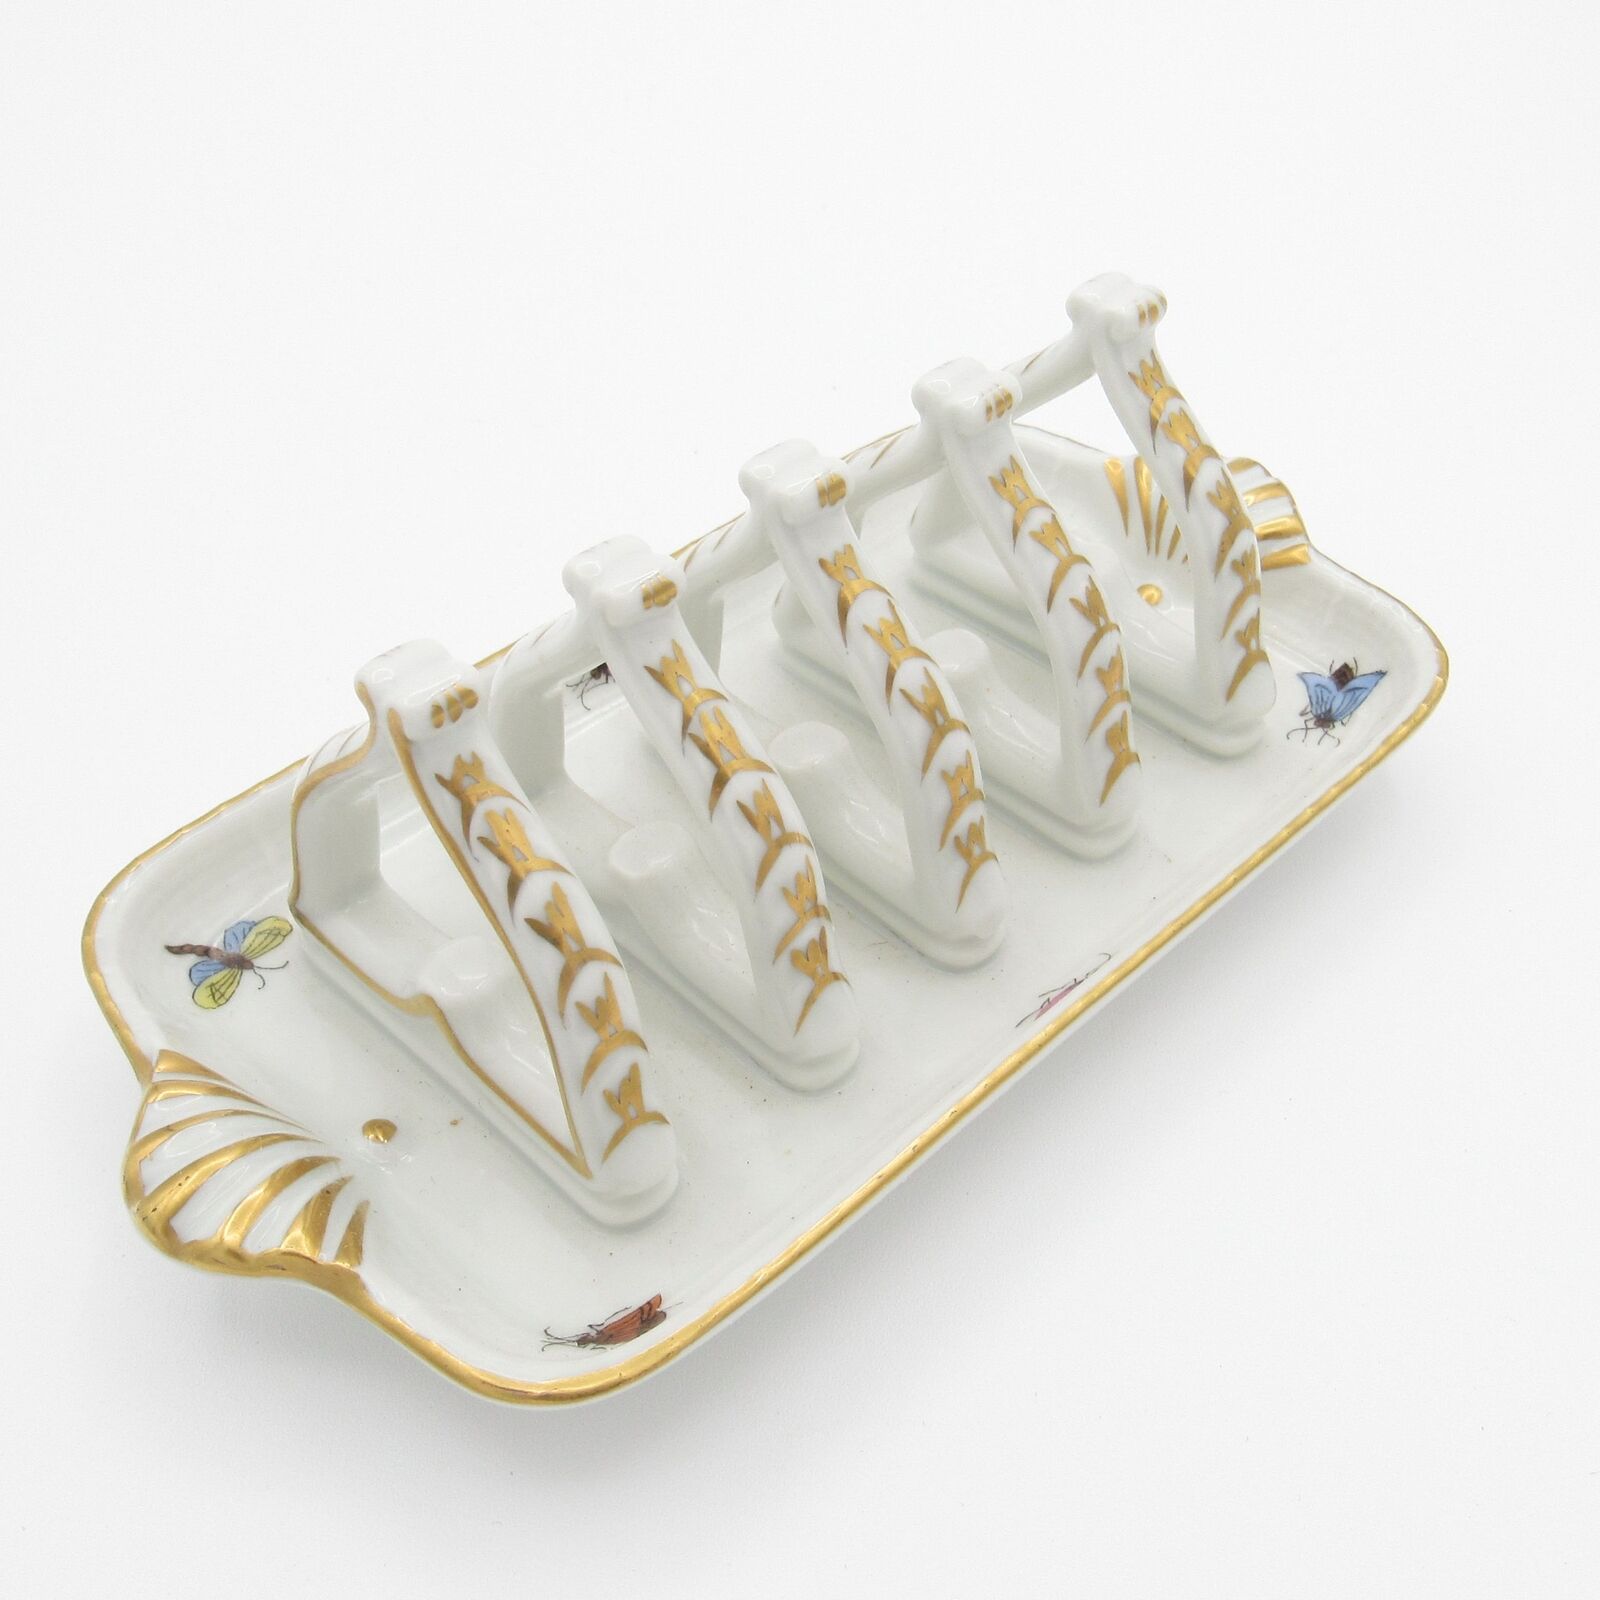 HEREND Hungary Hand Painted, Gold Accents with Bugs Toast Rack